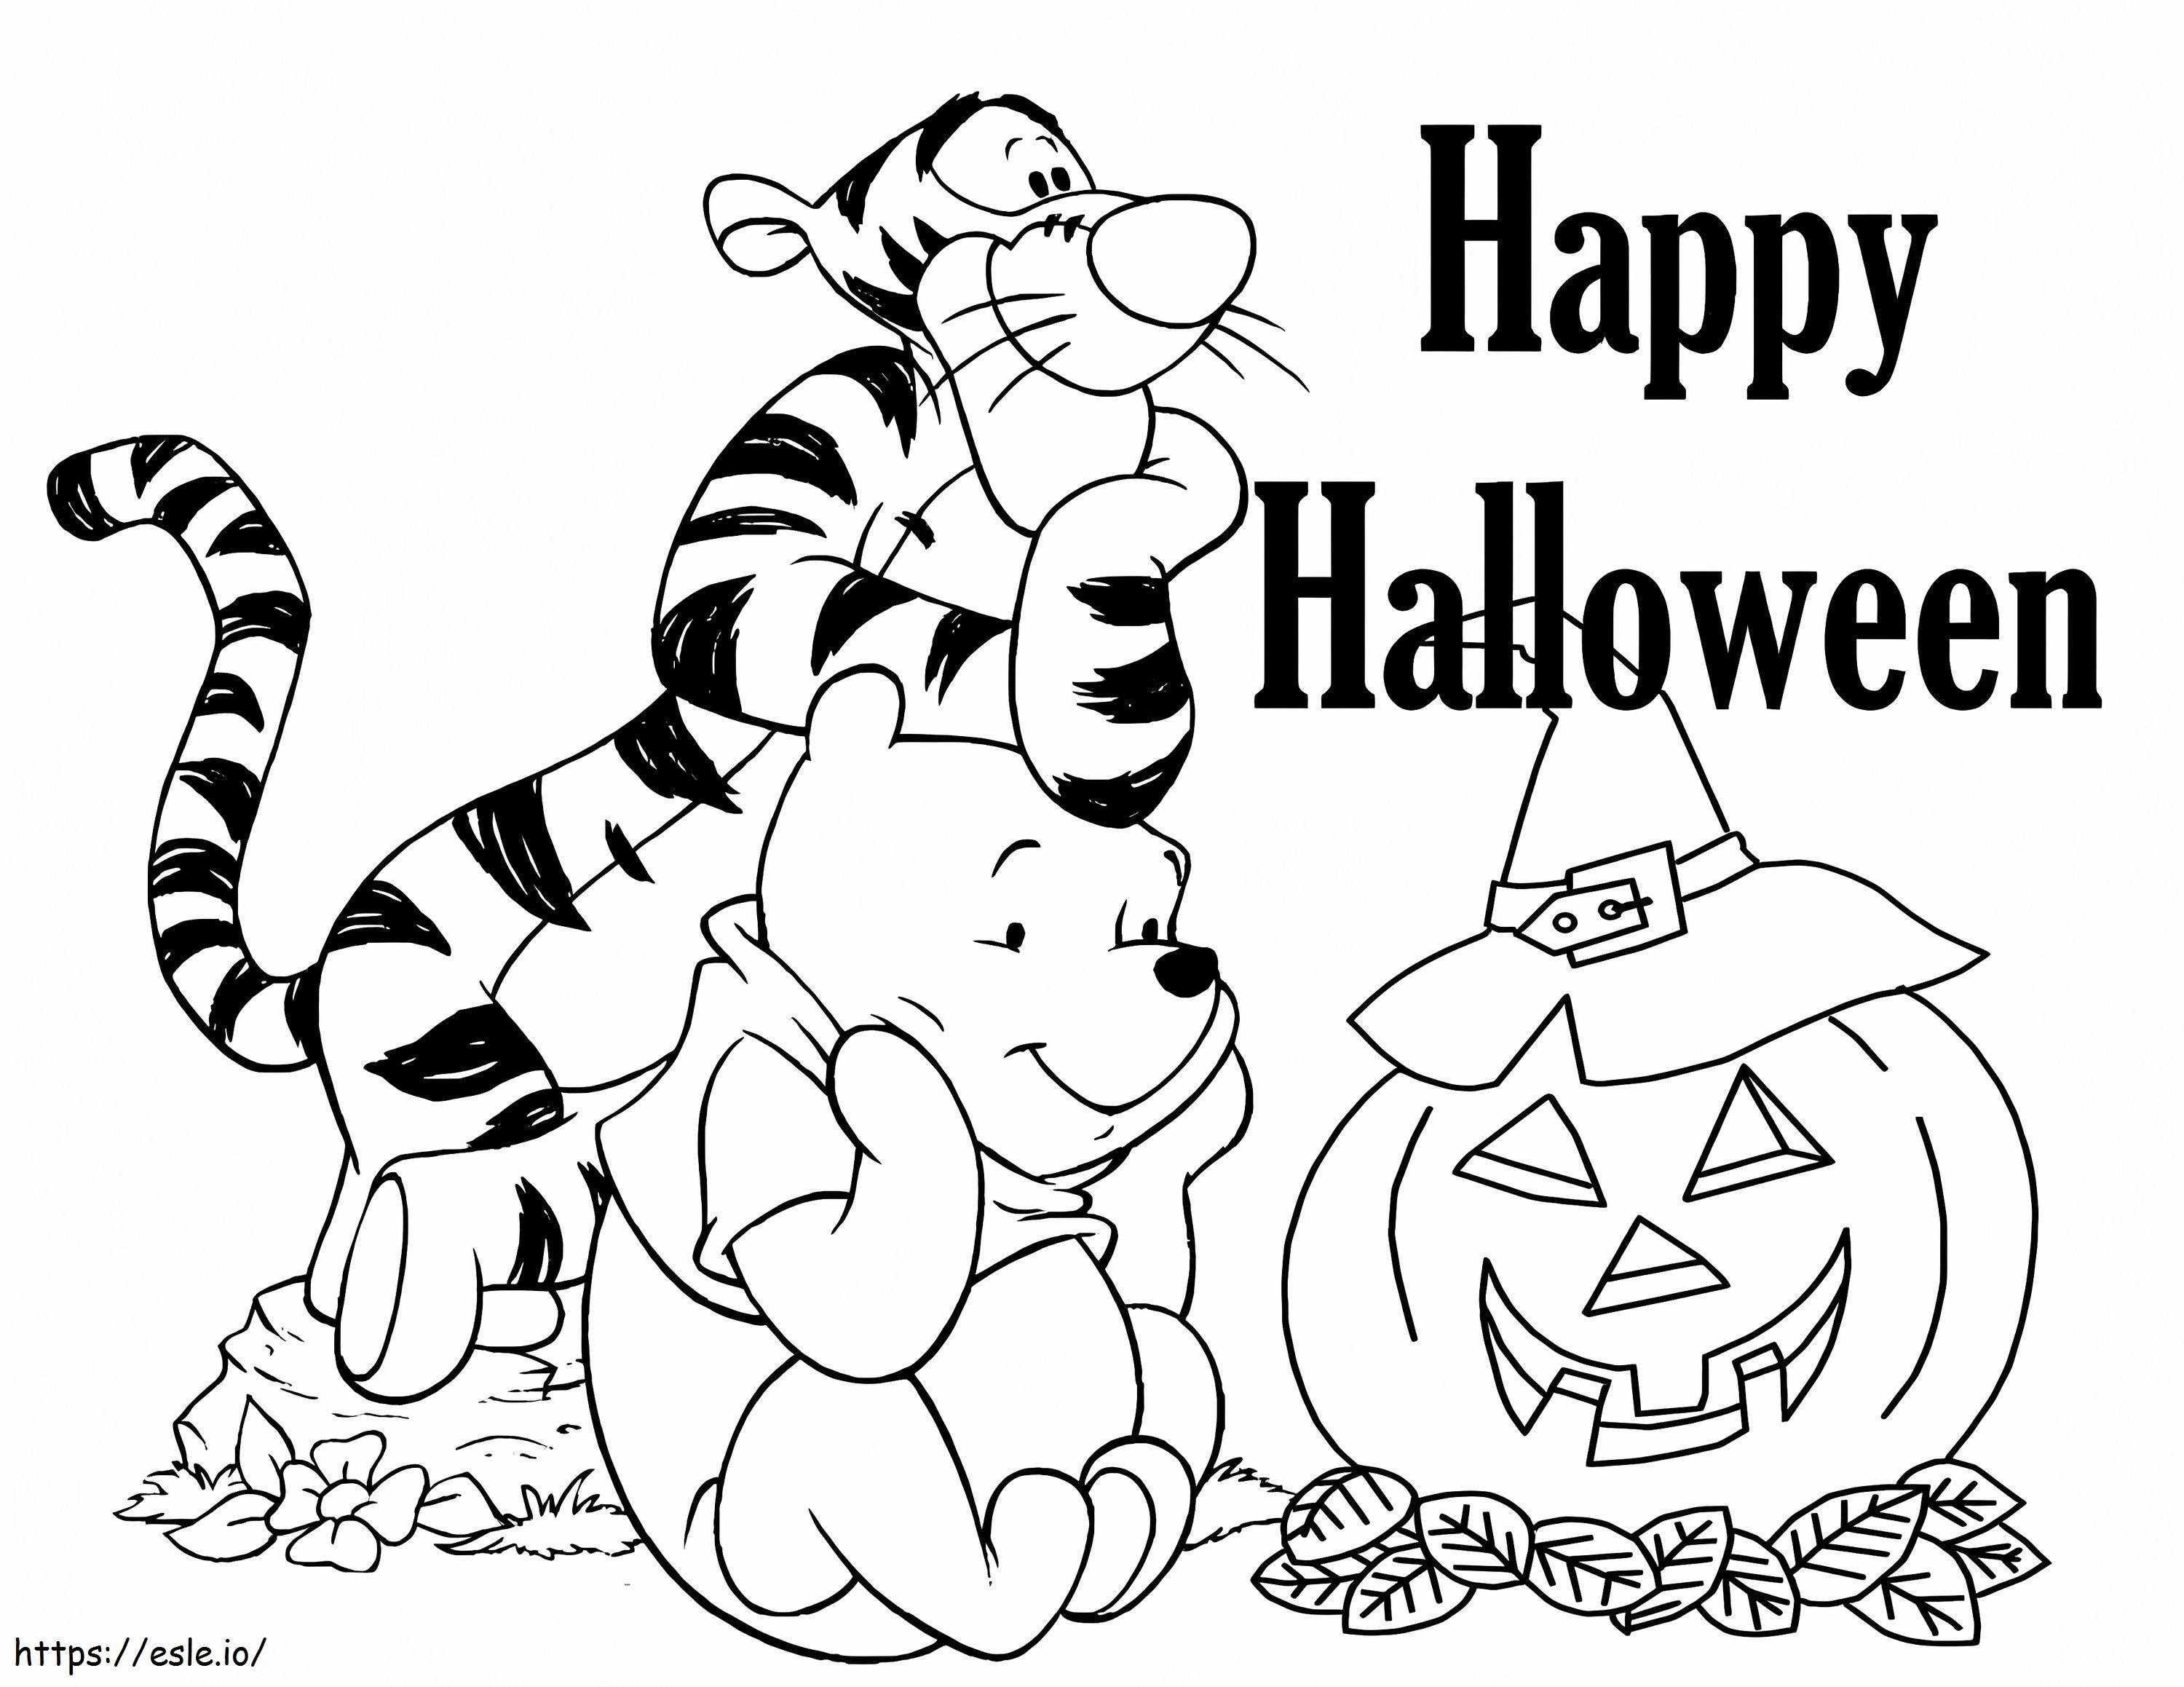 Tigger And Pooh On Halloween coloring page